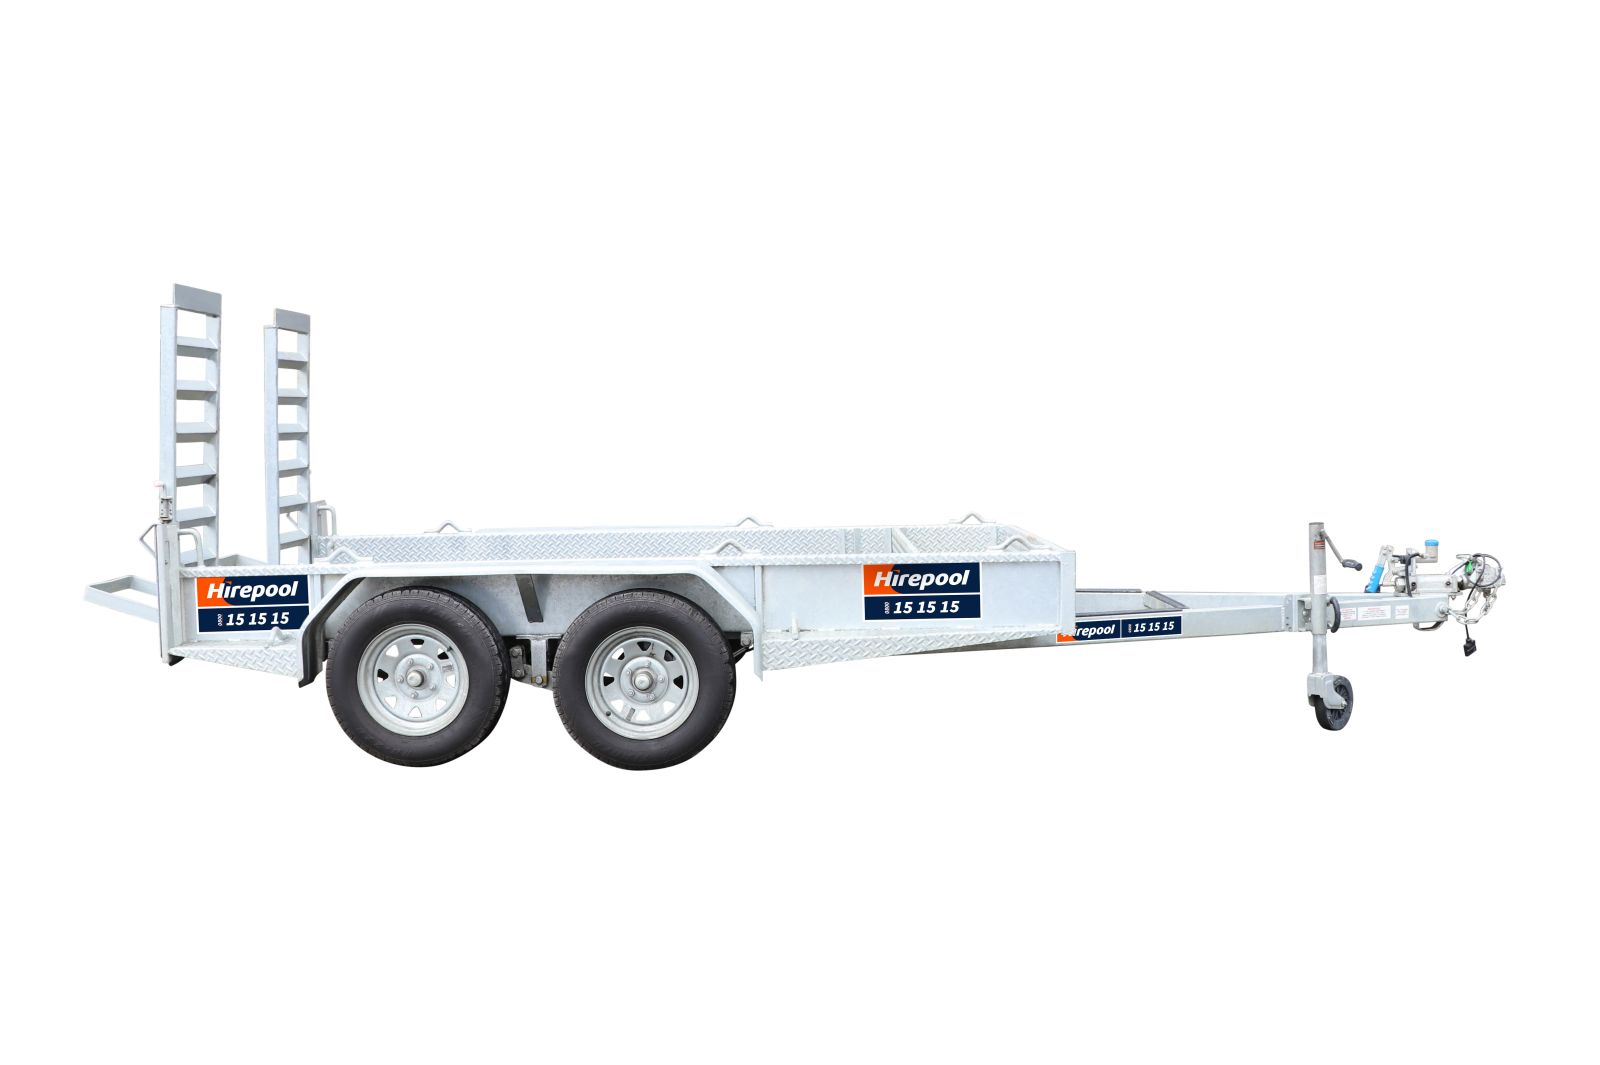 614B Trailer for Equipment Tandem Axle up to 1.8 Tonne